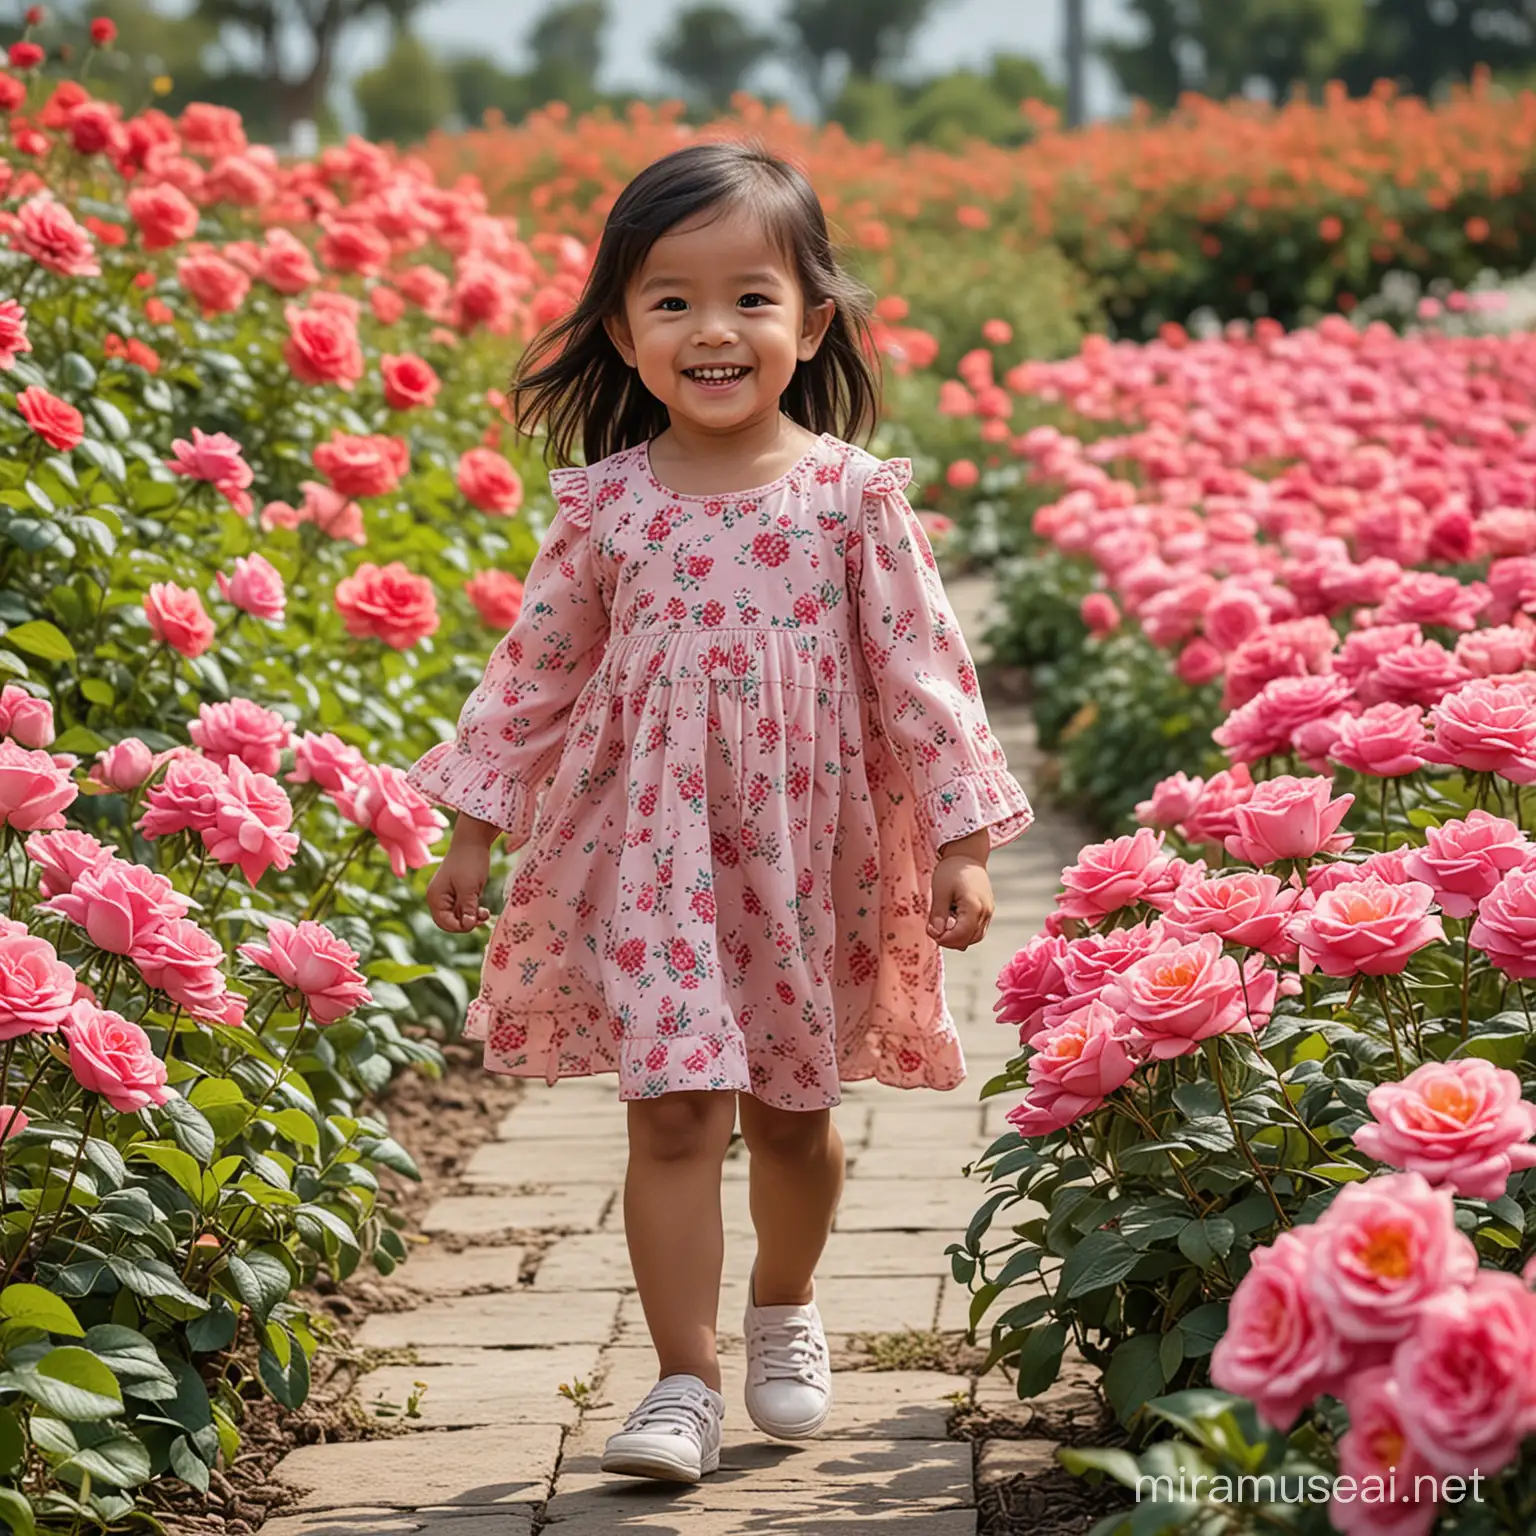 A 4-year-old child girl, with a Indonesian face, smiles happily as he carries his 4-year-old baby girl...walking around the colorful rose garden.
Beautiful flower garden background